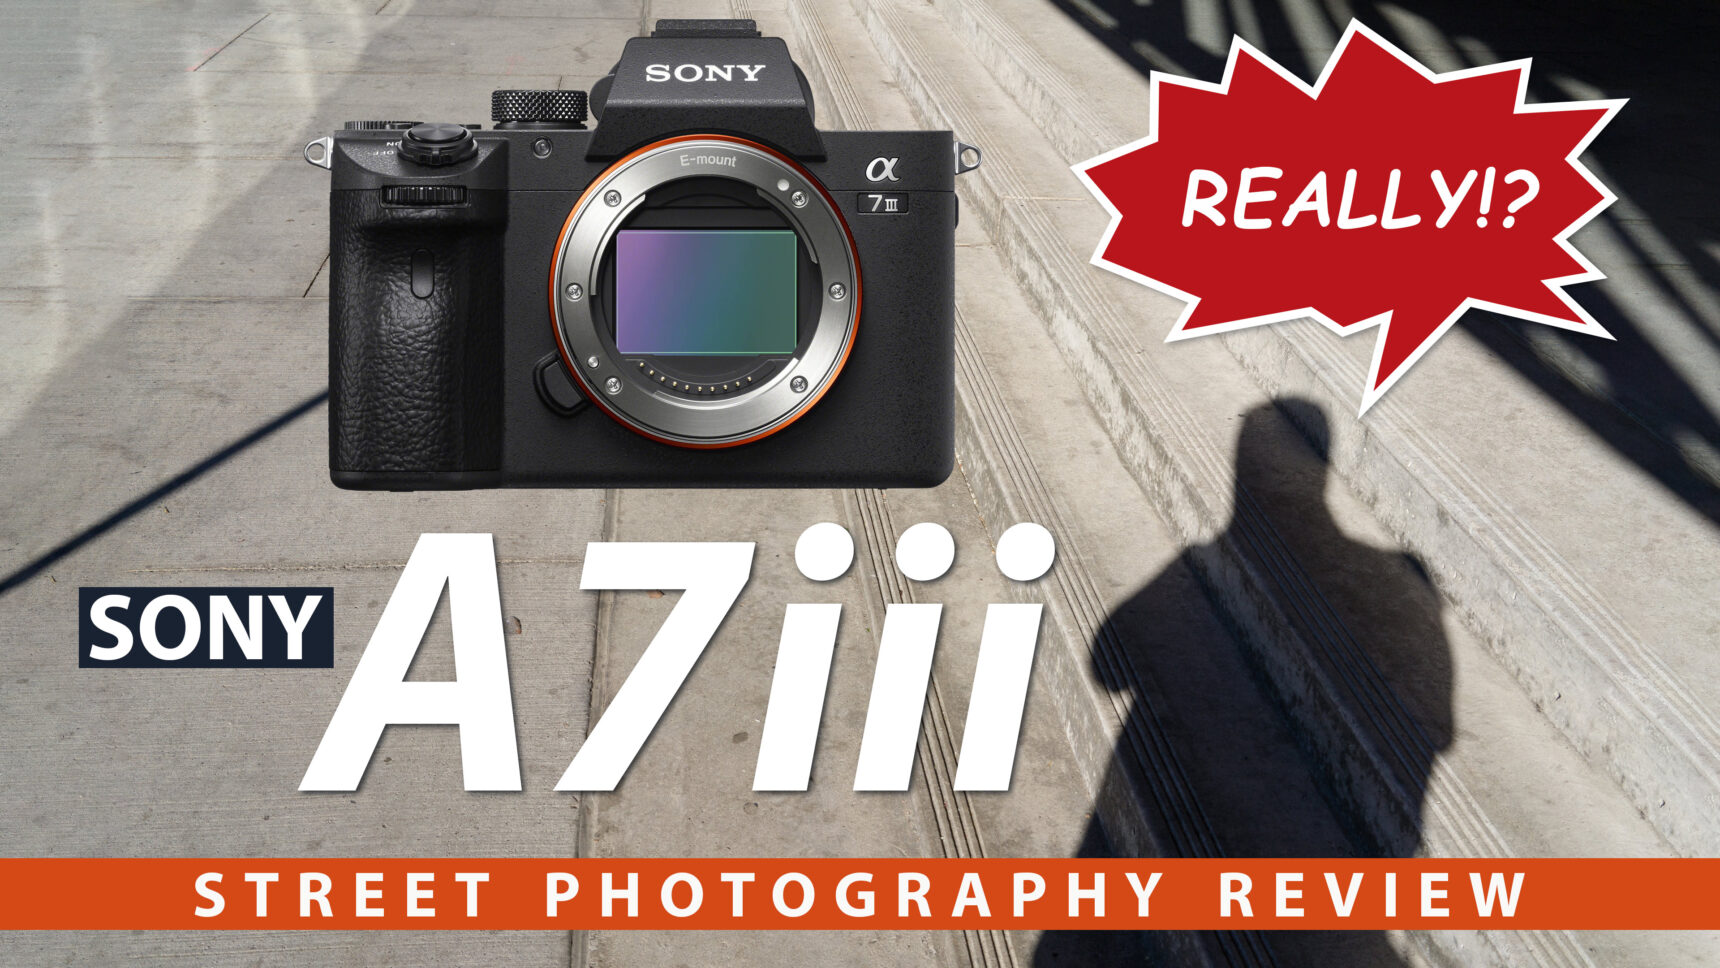 Sony A7iii Street Photography Review - Lives Up To The Hype?